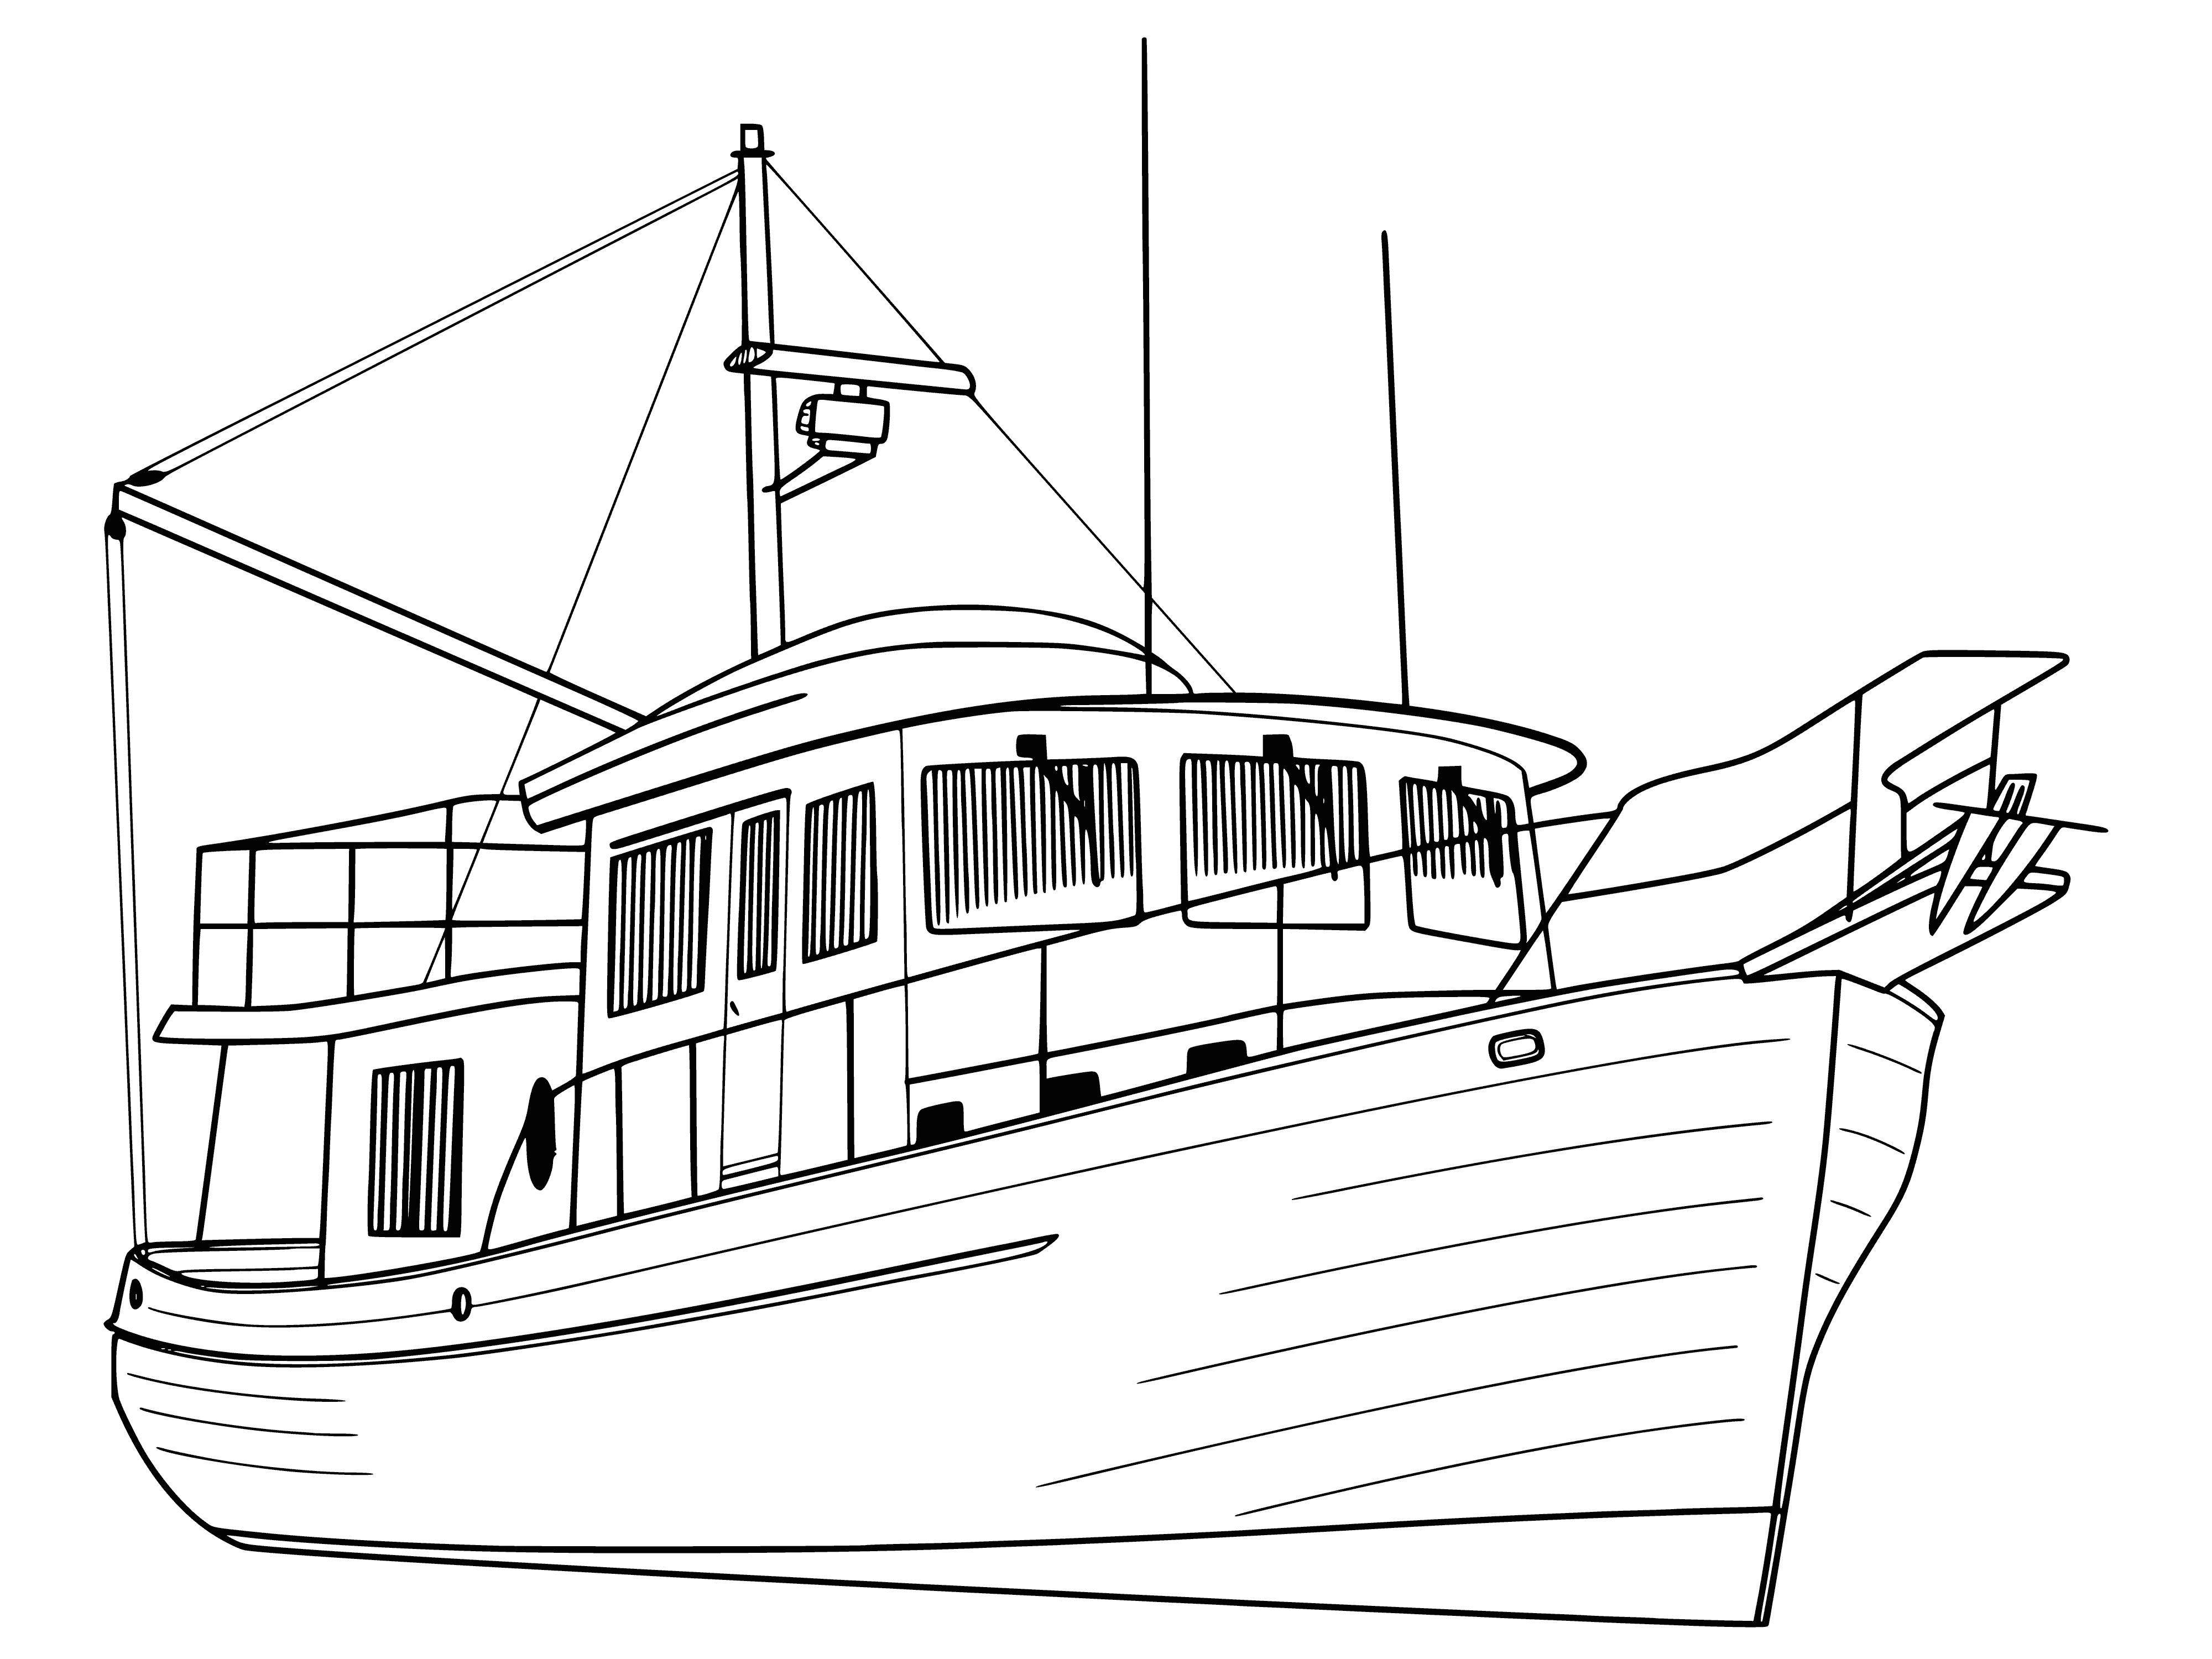 Trawler coloring page